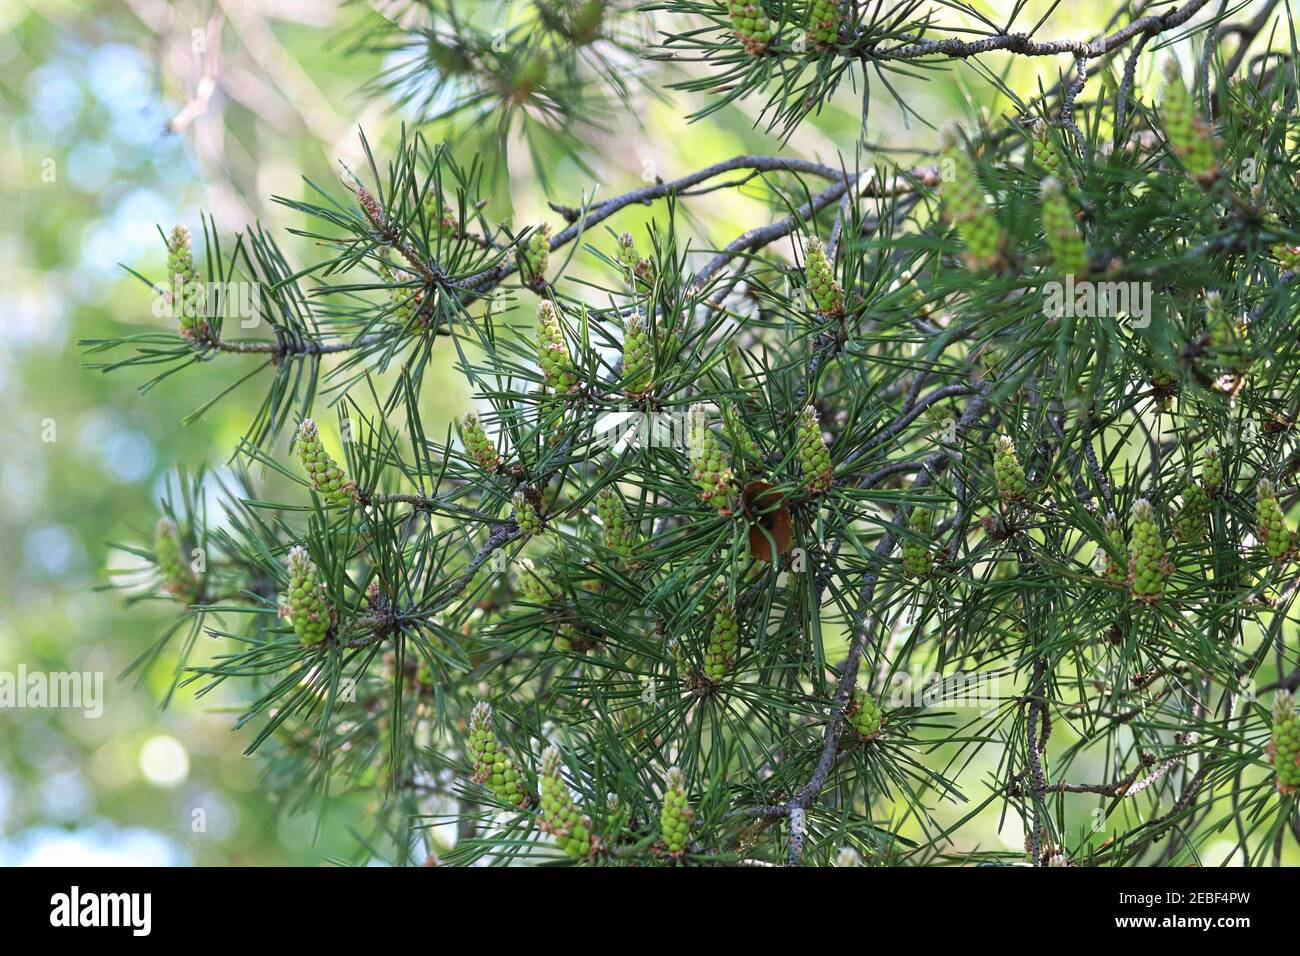 Lower branches of a pine tree covered in male cones Stock Photo